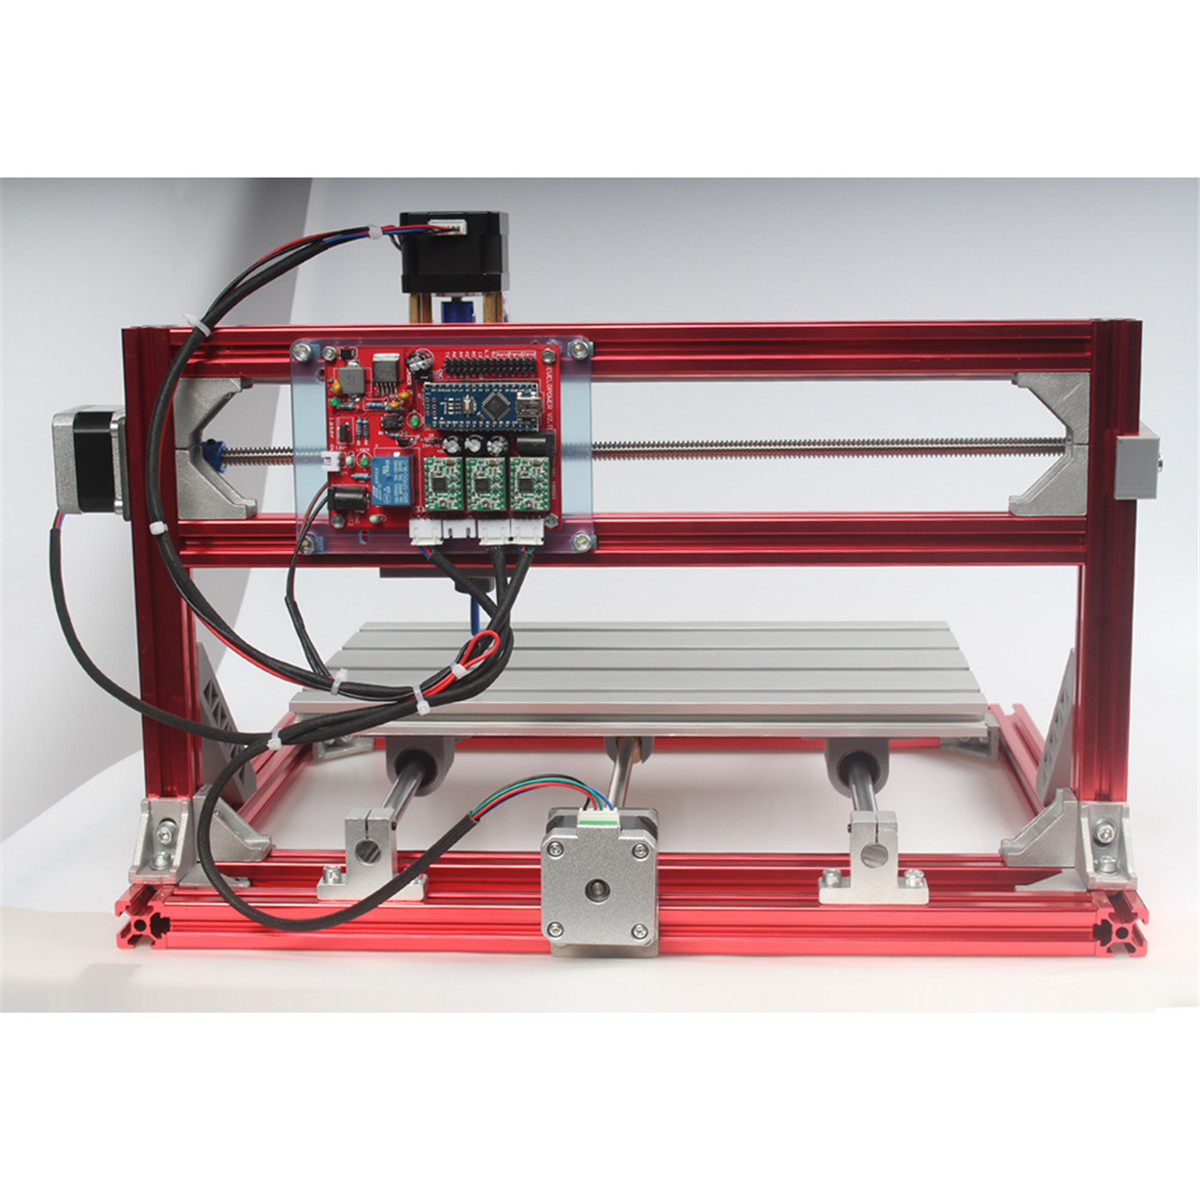 3018 3 Axis Red CNC Wood Engraving Carving PCB Milling Machine Router Engraver GRBLControl 14